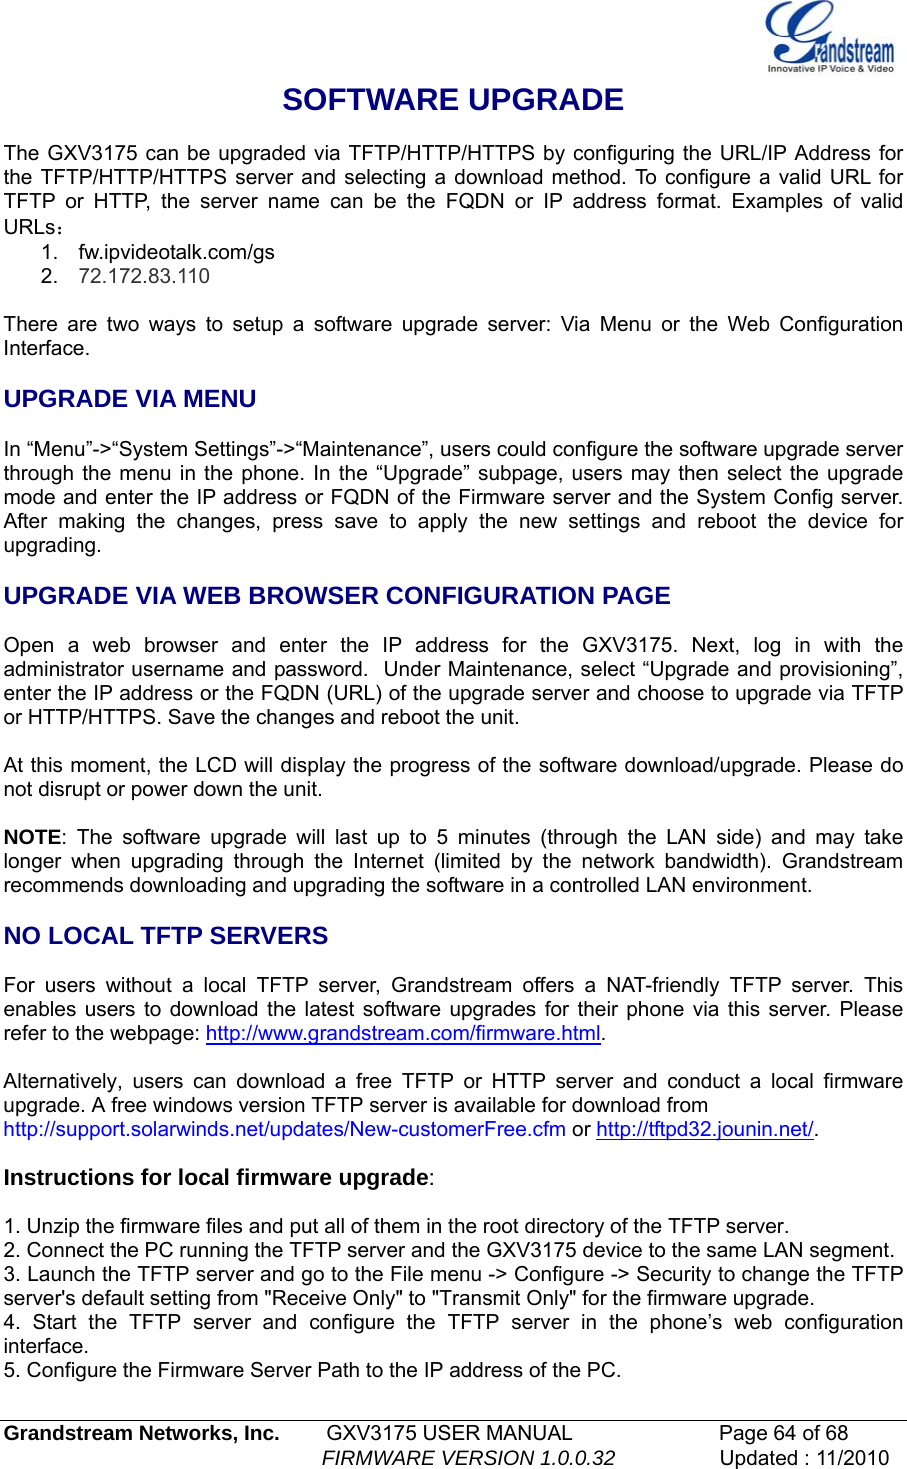   Grandstream Networks, Inc.        GXV3175 USER MANUAL                      Page 64 of 68                                                        FIRMWARE VERSION 1.0.0.32                  Updated : 11/2010  SOFTWARE UPGRADE  The GXV3175 can be upgraded via TFTP/HTTP/HTTPS by configuring the URL/IP Address for the TFTP/HTTP/HTTPS server and selecting a download method. To configure a valid URL for TFTP or HTTP, the server name can be the FQDN or IP address format. Examples of valid URLs： 1. fw.ipvideotalk.com/gs 2.  72.172.83.110  There are two ways to setup a software upgrade server: Via Menu or the Web Configuration Interface.  UPGRADE VIA MENU  In “Menu”-&gt;“System Settings”-&gt;“Maintenance”, users could configure the software upgrade server through the menu in the phone. In the “Upgrade” subpage, users may then select the upgrade mode and enter the IP address or FQDN of the Firmware server and the System Config server. After making the changes, press save to apply the new settings and reboot the device for upgrading.  UPGRADE VIA WEB BROWSER CONFIGURATION PAGE  Open a web browser and enter the IP address for the GXV3175. Next, log in with the administrator username and password.  Under Maintenance, select “Upgrade and provisioning”, enter the IP address or the FQDN (URL) of the upgrade server and choose to upgrade via TFTP or HTTP/HTTPS. Save the changes and reboot the unit.  At this moment, the LCD will display the progress of the software download/upgrade. Please do not disrupt or power down the unit.  NOTE: The software upgrade will last up to 5 minutes (through the LAN side) and may take longer when upgrading through the Internet (limited by the network bandwidth). Grandstream recommends downloading and upgrading the software in a controlled LAN environment.   NO LOCAL TFTP SERVERS  For users without a local TFTP server, Grandstream offers a NAT-friendly TFTP server. This enables users to download the latest software upgrades for their phone via this server. Please refer to the webpage: http://www.grandstream.com/firmware.html.  Alternatively, users can download a free TFTP or HTTP server and conduct a local firmware upgrade. A free windows version TFTP server is available for download from  http://support.solarwinds.net/updates/New-customerFree.cfm or http://tftpd32.jounin.net/.   Instructions for local firmware upgrade:  1. Unzip the firmware files and put all of them in the root directory of the TFTP server. 2. Connect the PC running the TFTP server and the GXV3175 device to the same LAN segment. 3. Launch the TFTP server and go to the File menu -&gt; Configure -&gt; Security to change the TFTP server&apos;s default setting from &quot;Receive Only&quot; to &quot;Transmit Only&quot; for the firmware upgrade. 4. Start the TFTP server and configure the TFTP server in the phone’s web configuration interface. 5. Configure the Firmware Server Path to the IP address of the PC. 